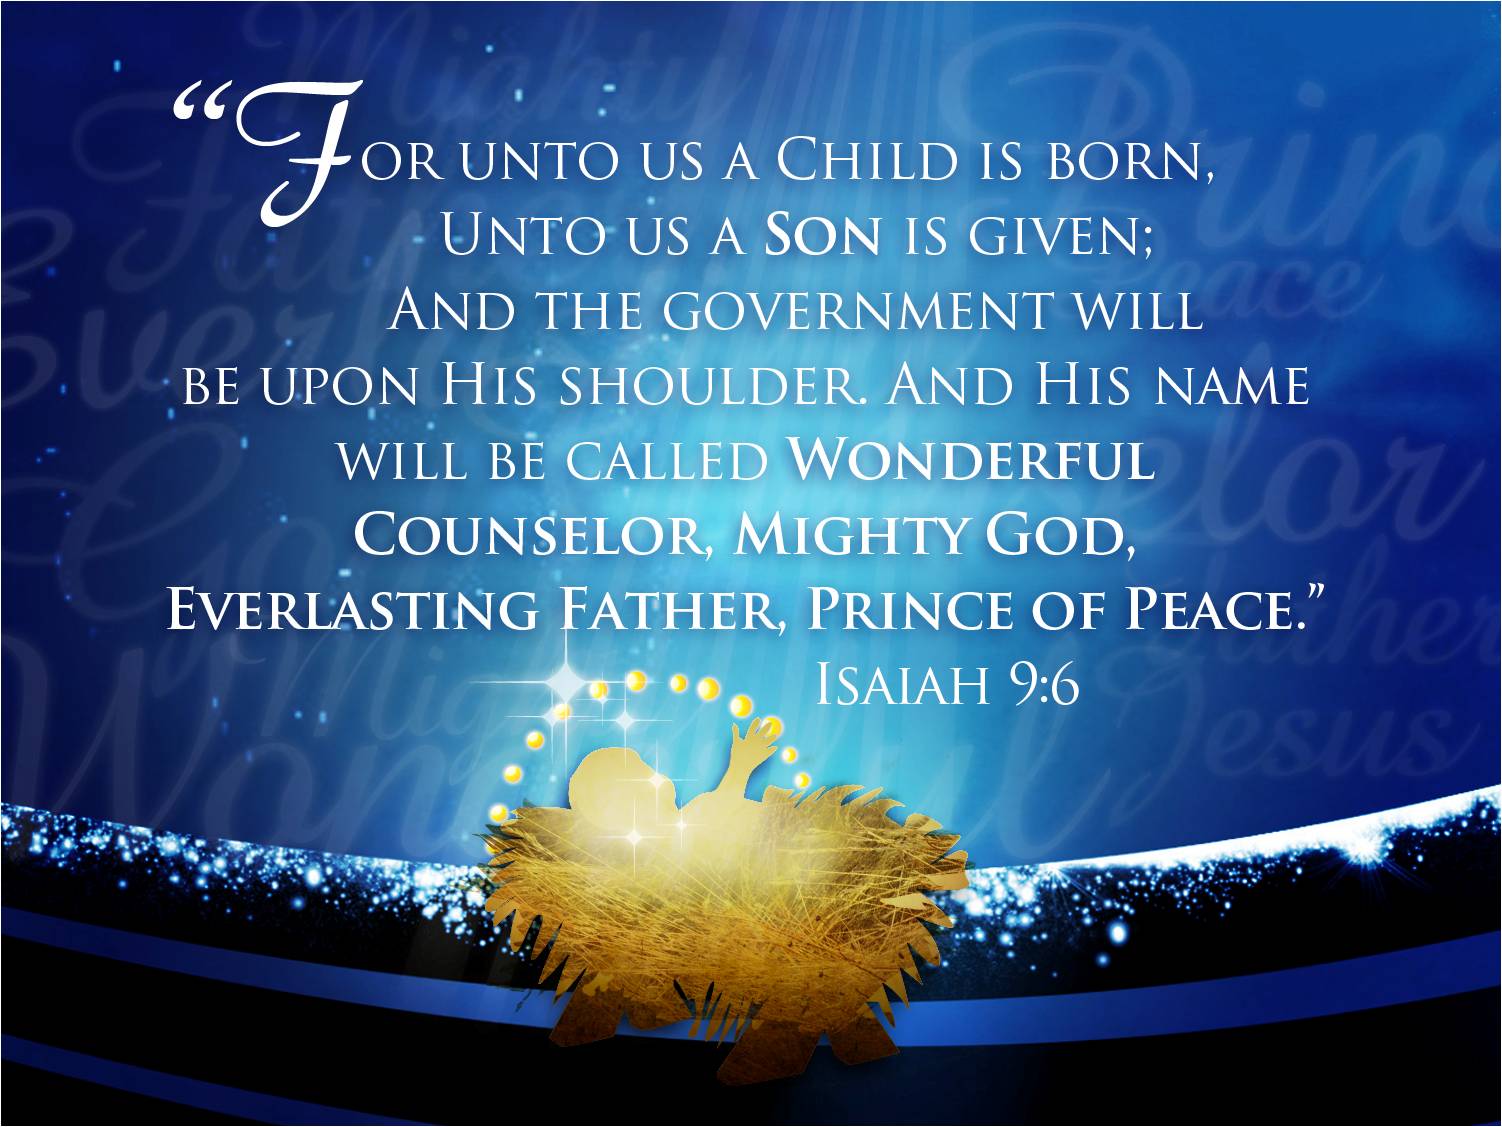 Isaiah 9:6 a child is born